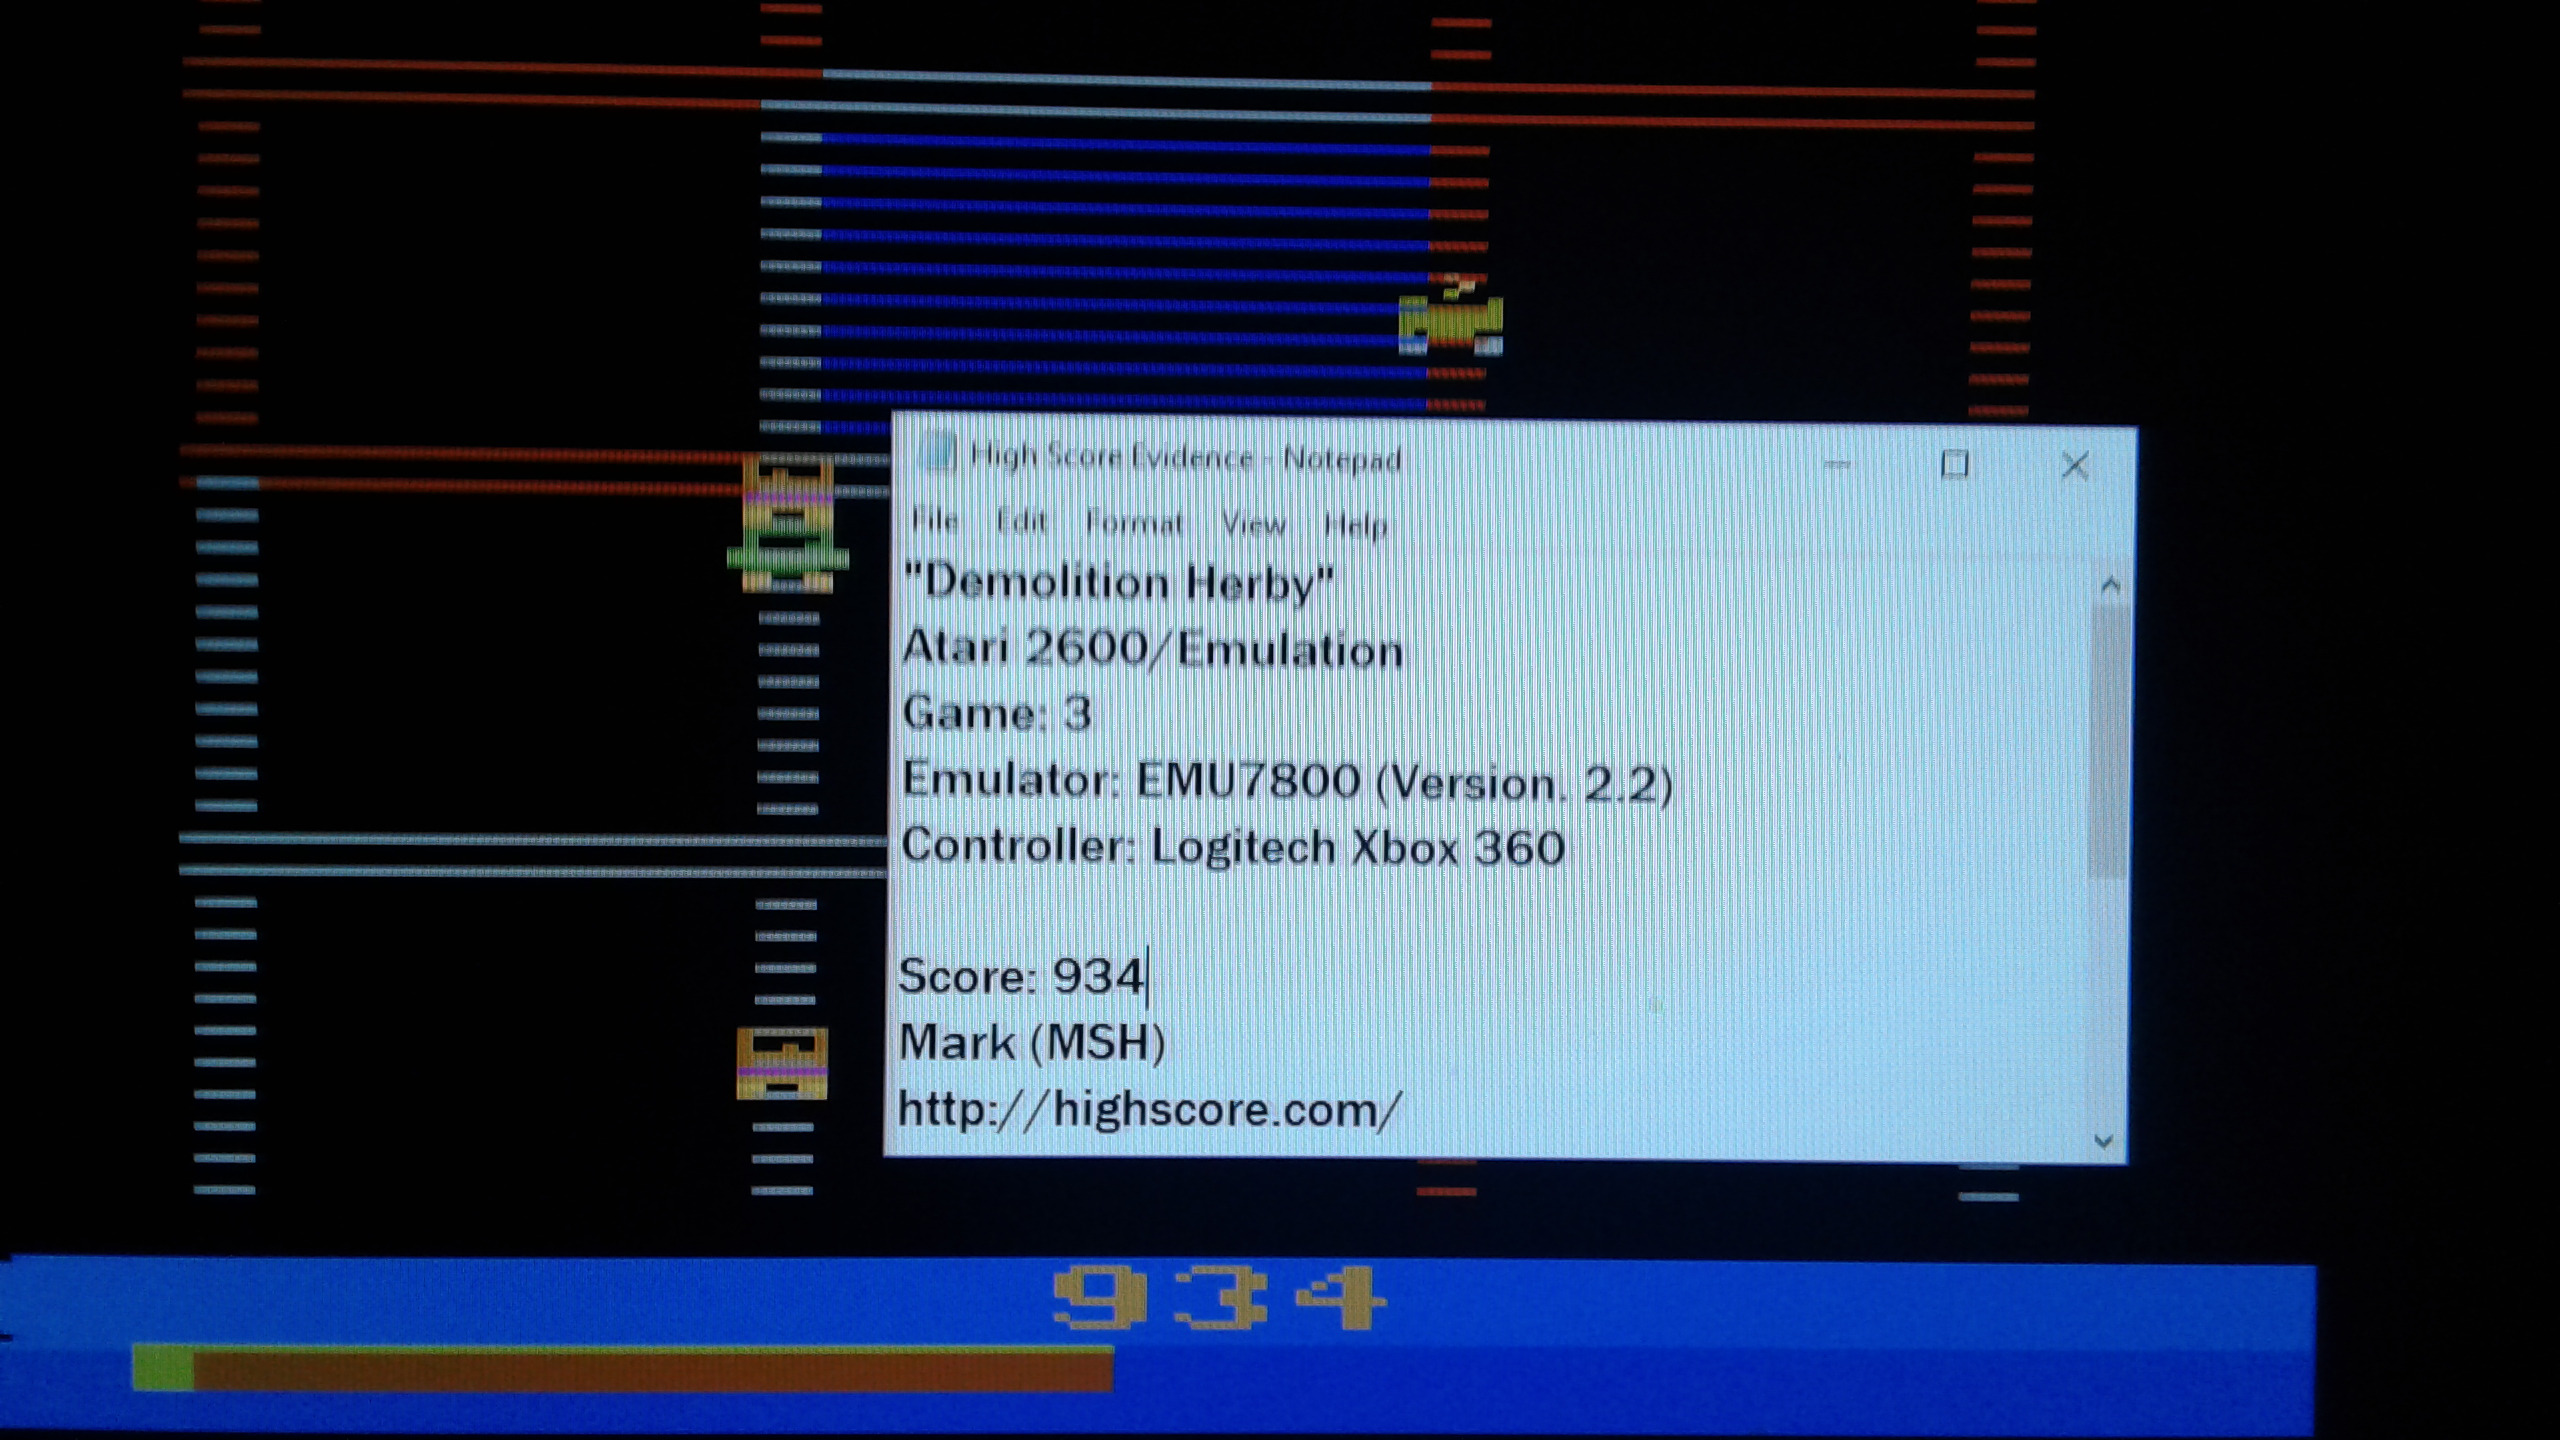 Mark: Demolition Herby: Game 3 (Atari 2600 Emulated) 934 points on 2019-03-13 23:48:47